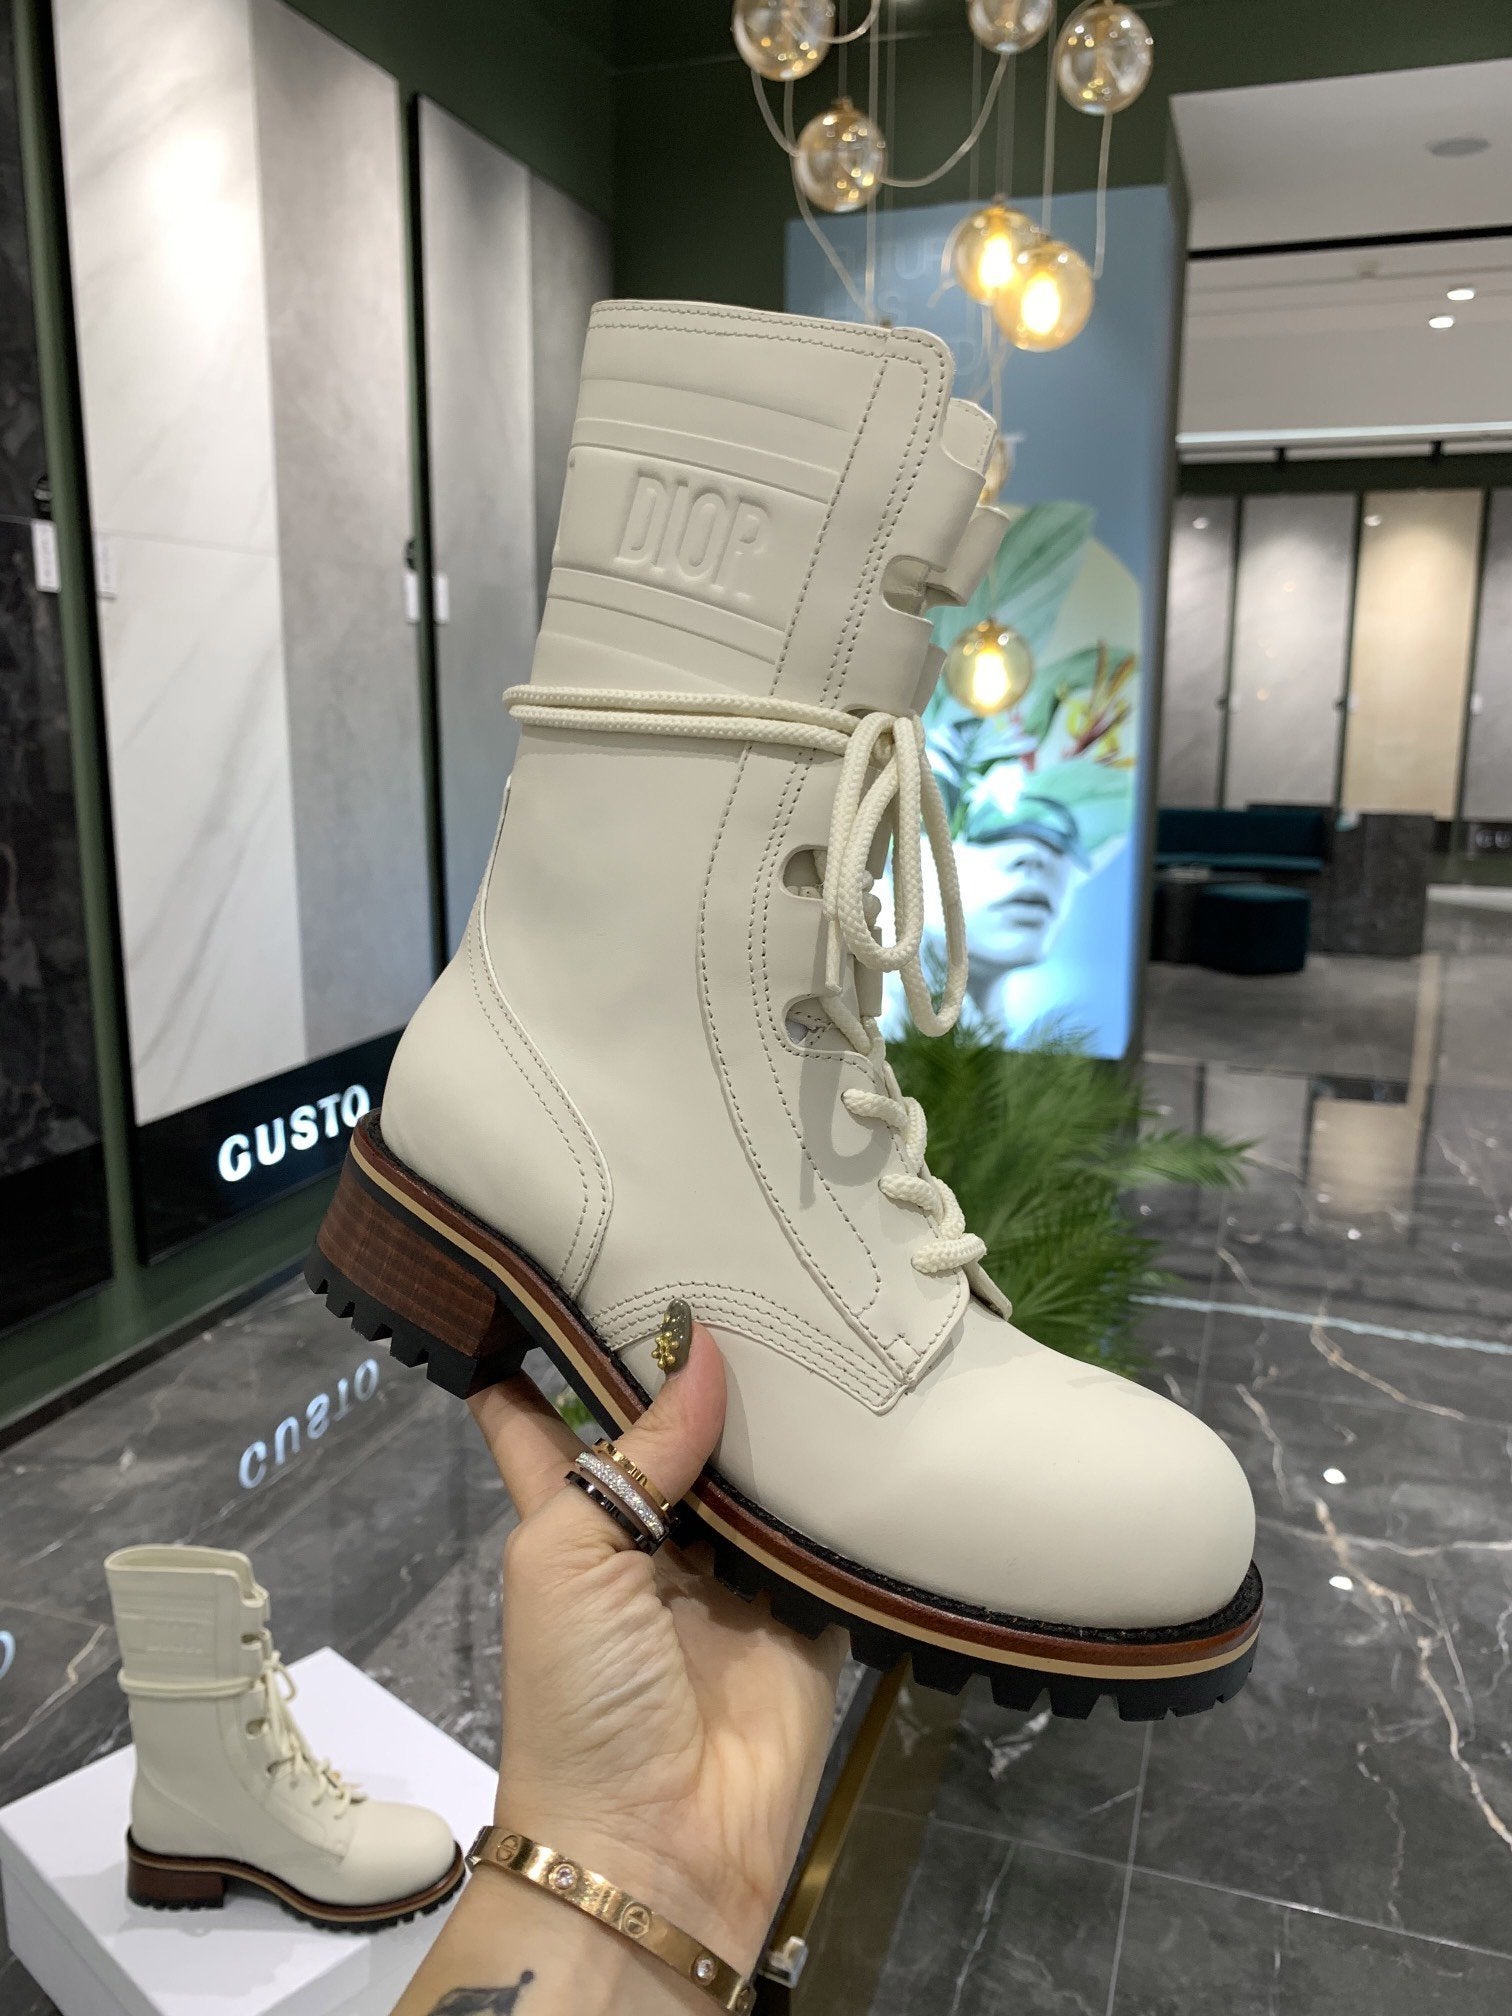 Dior 2021 NEW Women's Leather Fashioin Zipper Lace-up Ankle Boots Shoes High Boots white